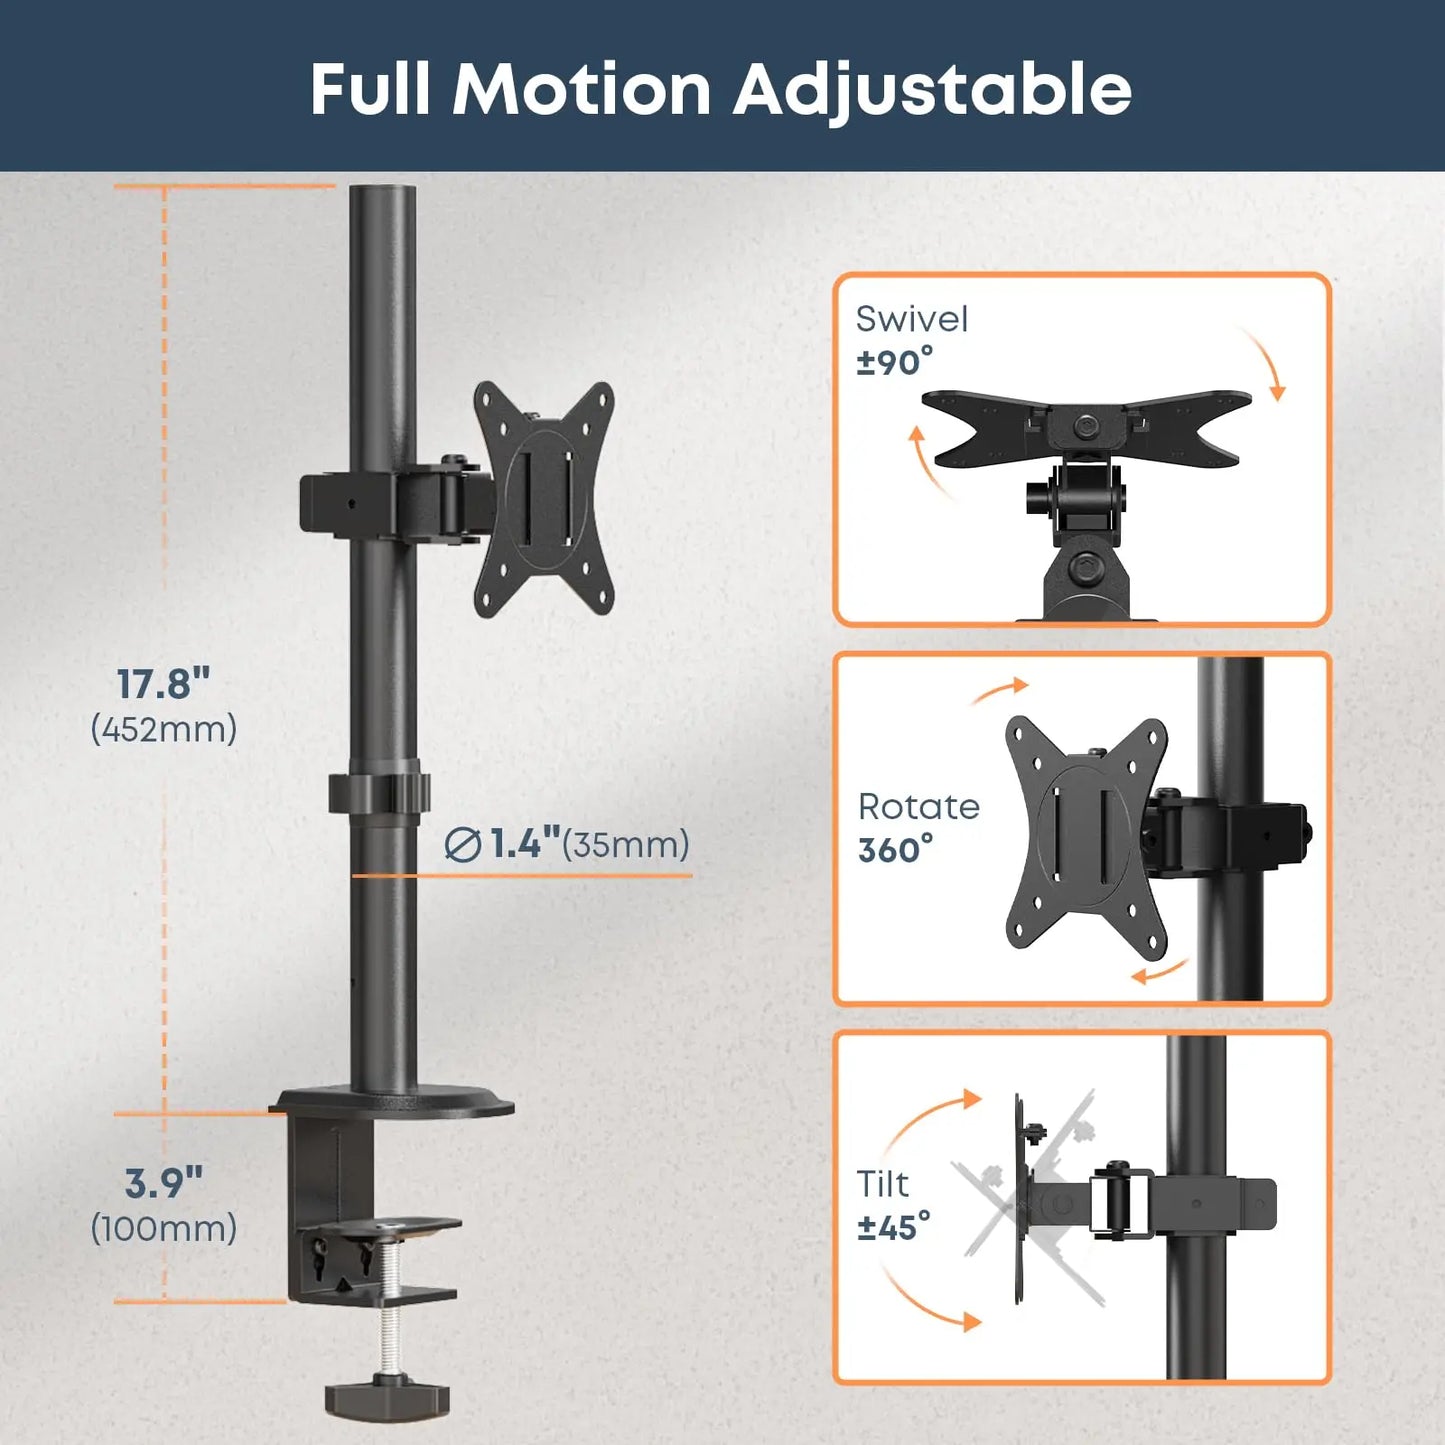 PUTORSEN Single Monitor Desk Mount for 17-42 Inch Monitor and TV, up to 26.4 lbs, Ultrawide Monitor Arm Mount for Flat Curved Computer & TV Screen with VESA 75×75 to 200×200, with Cable Clips PUTORSEN